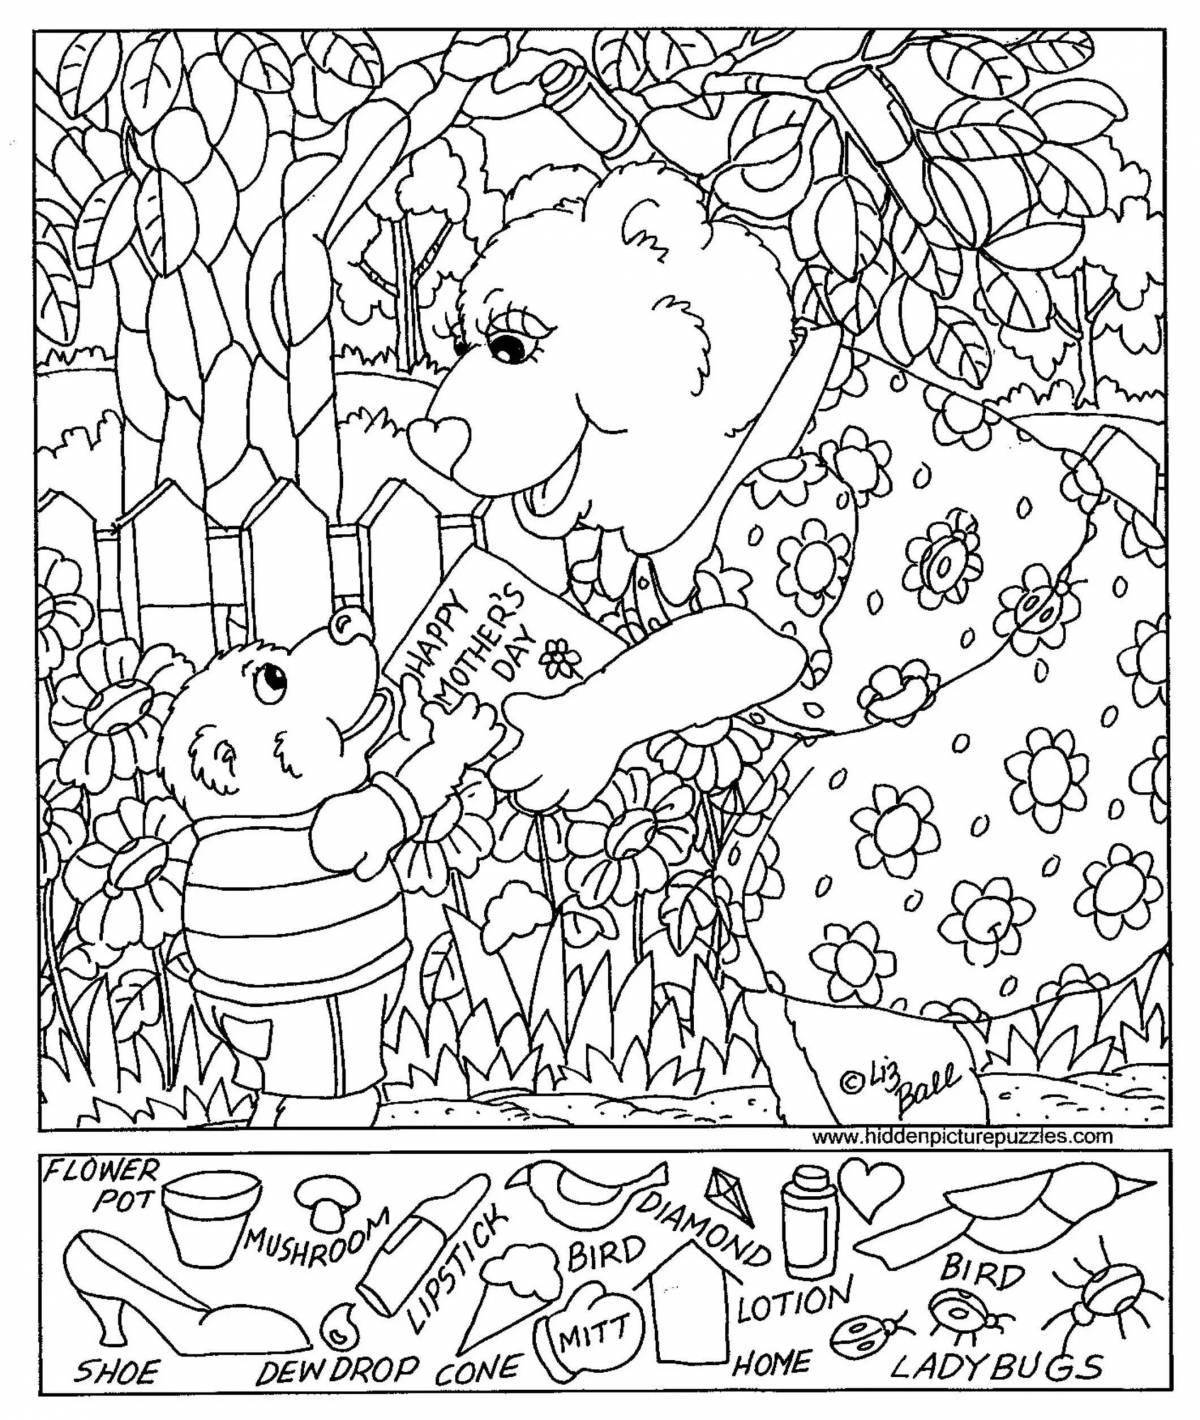 Find an object wonderful coloring book